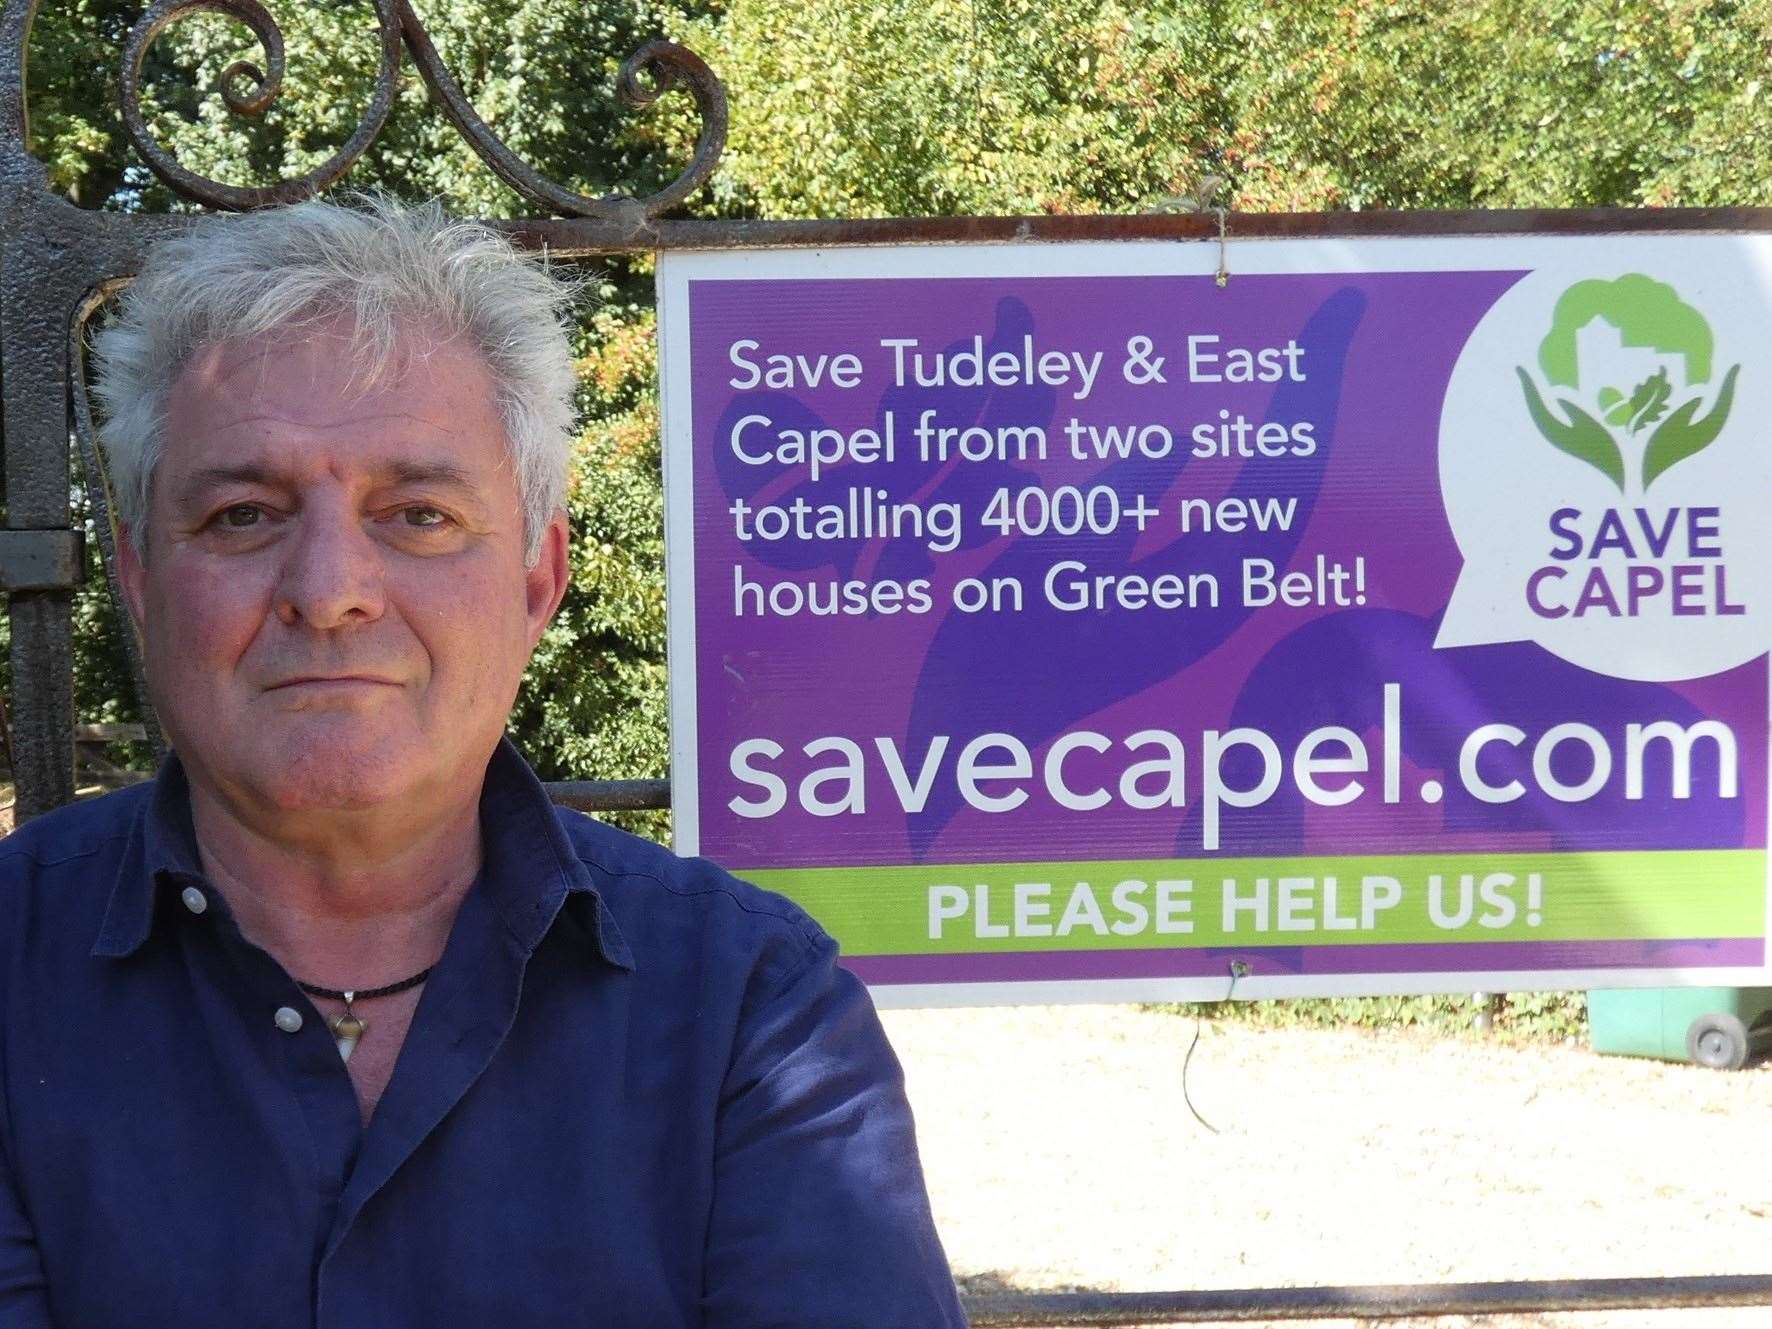 Dave Lovell, chairman of Save Capel warned of "urban sprawl"